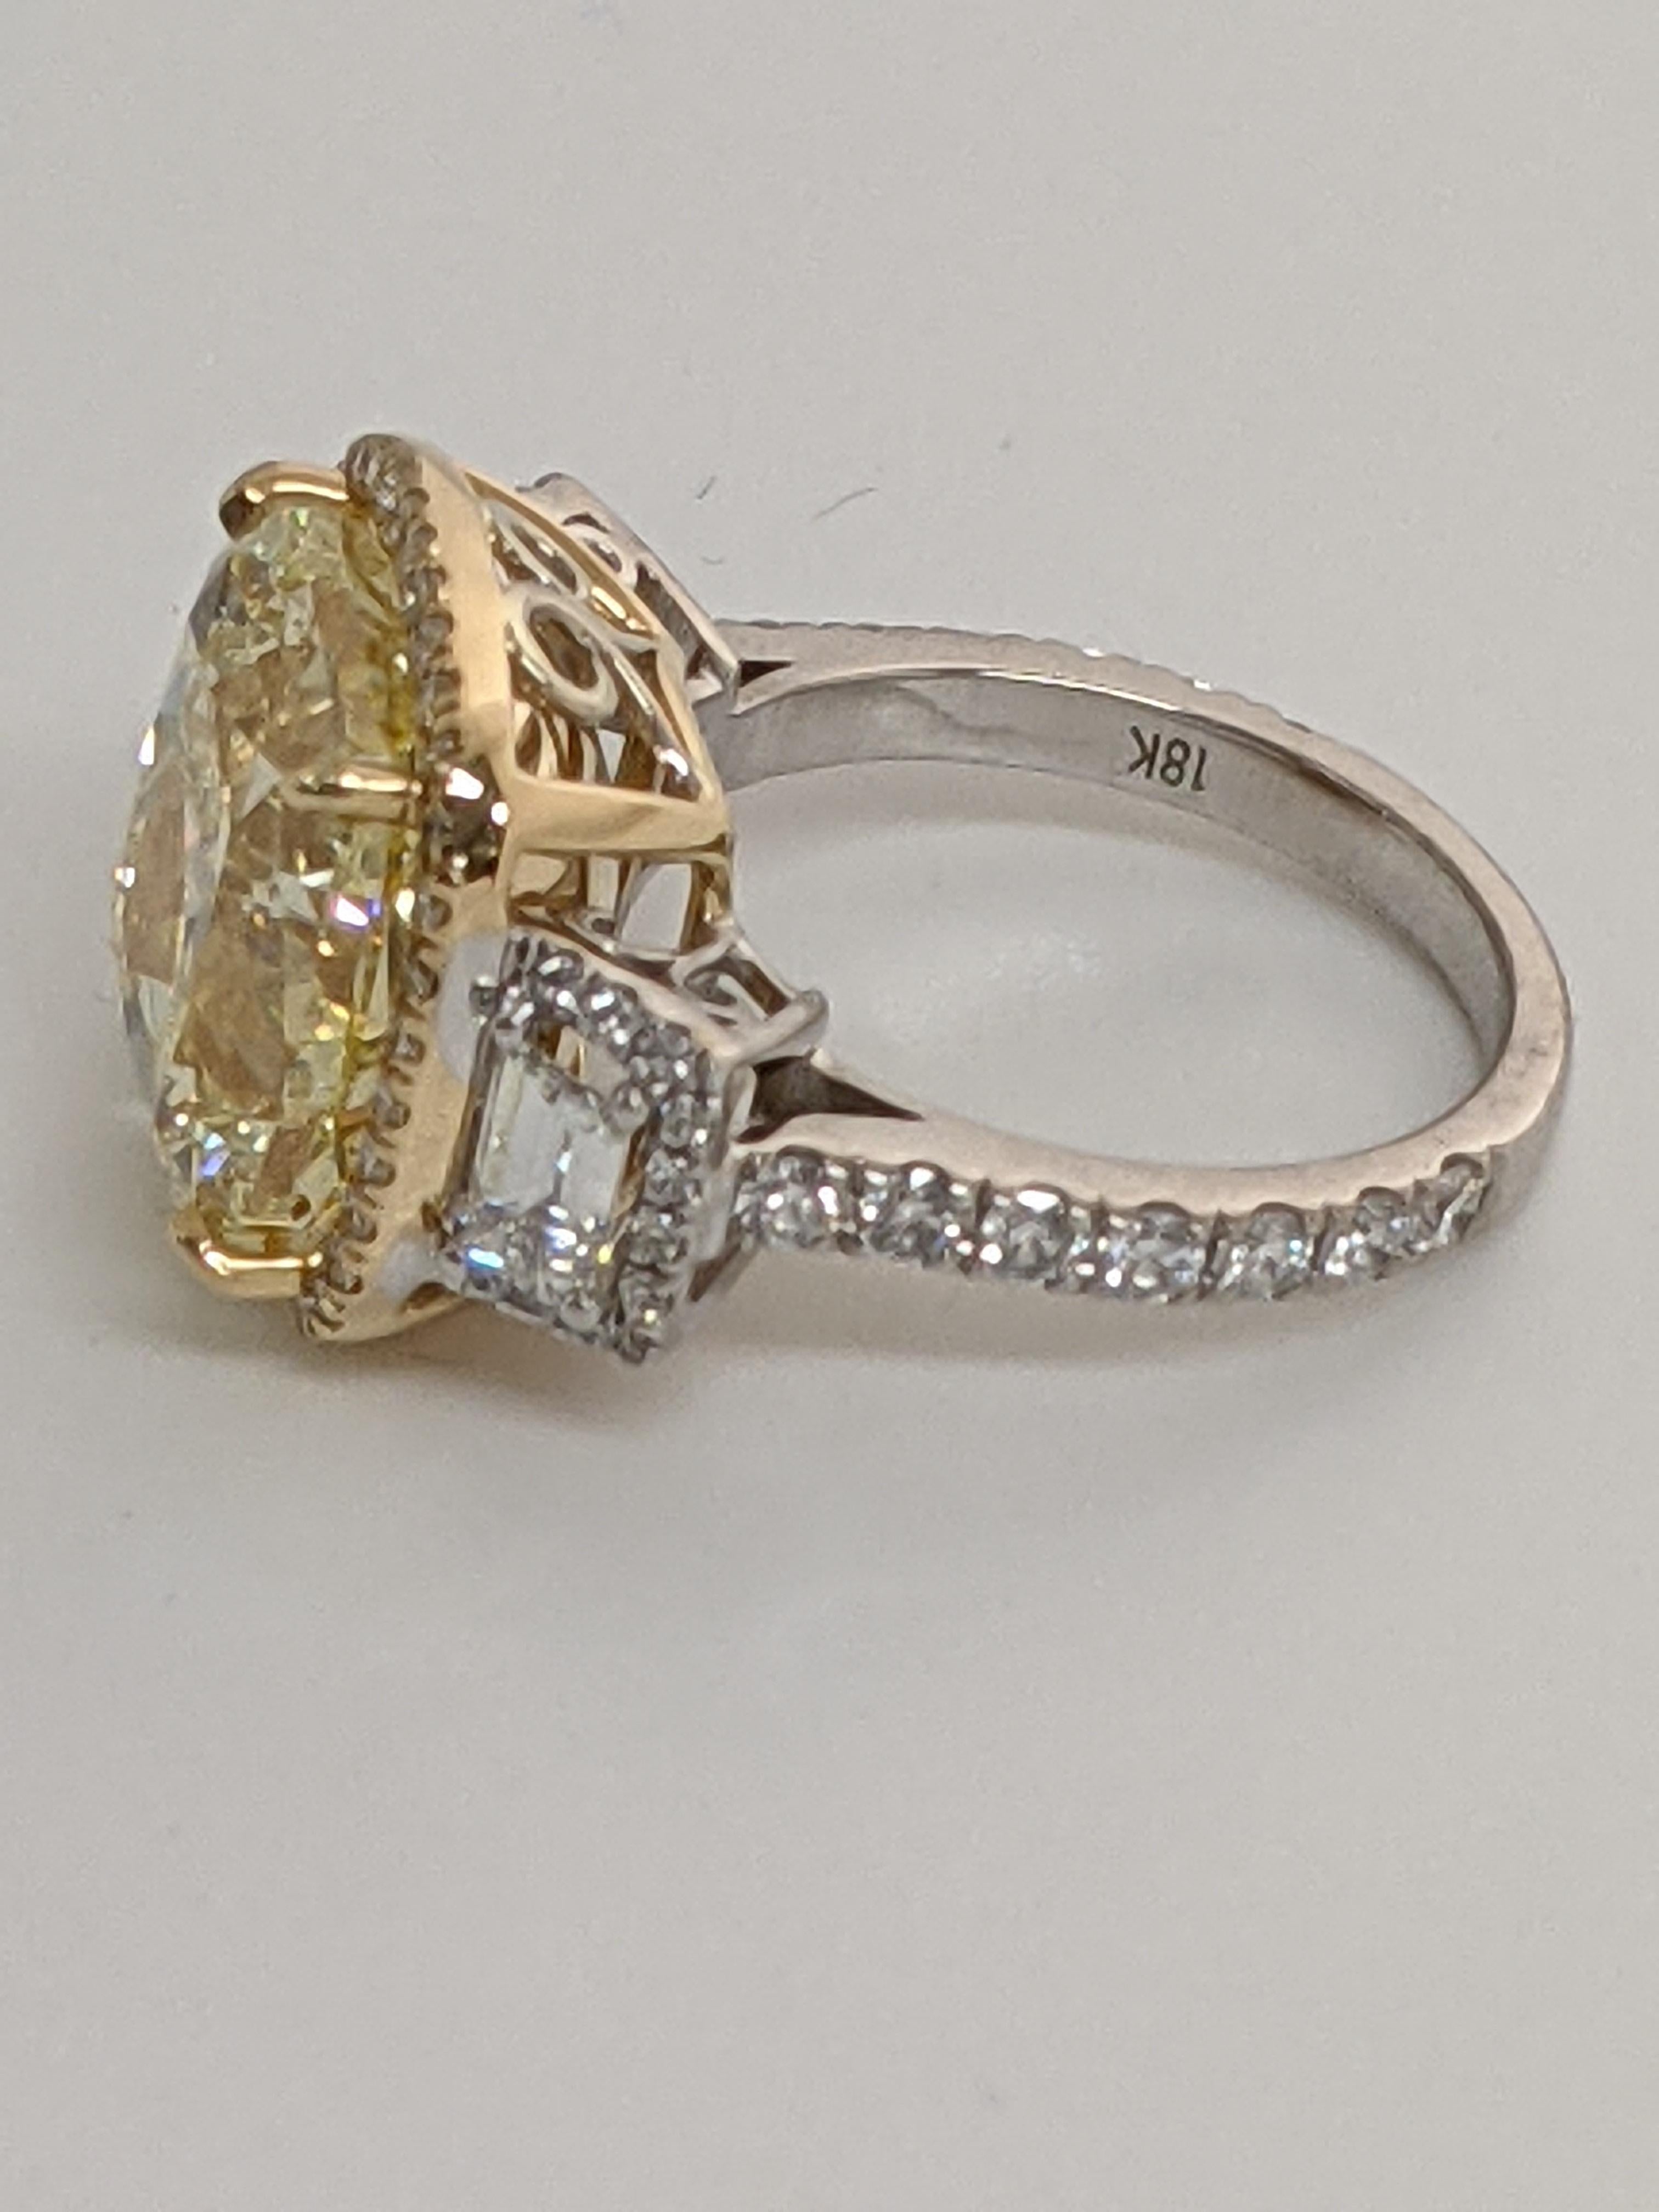 Contemporary 10 carat Fancy Light Yellow Diamond Ring VS1. GIA For Sale